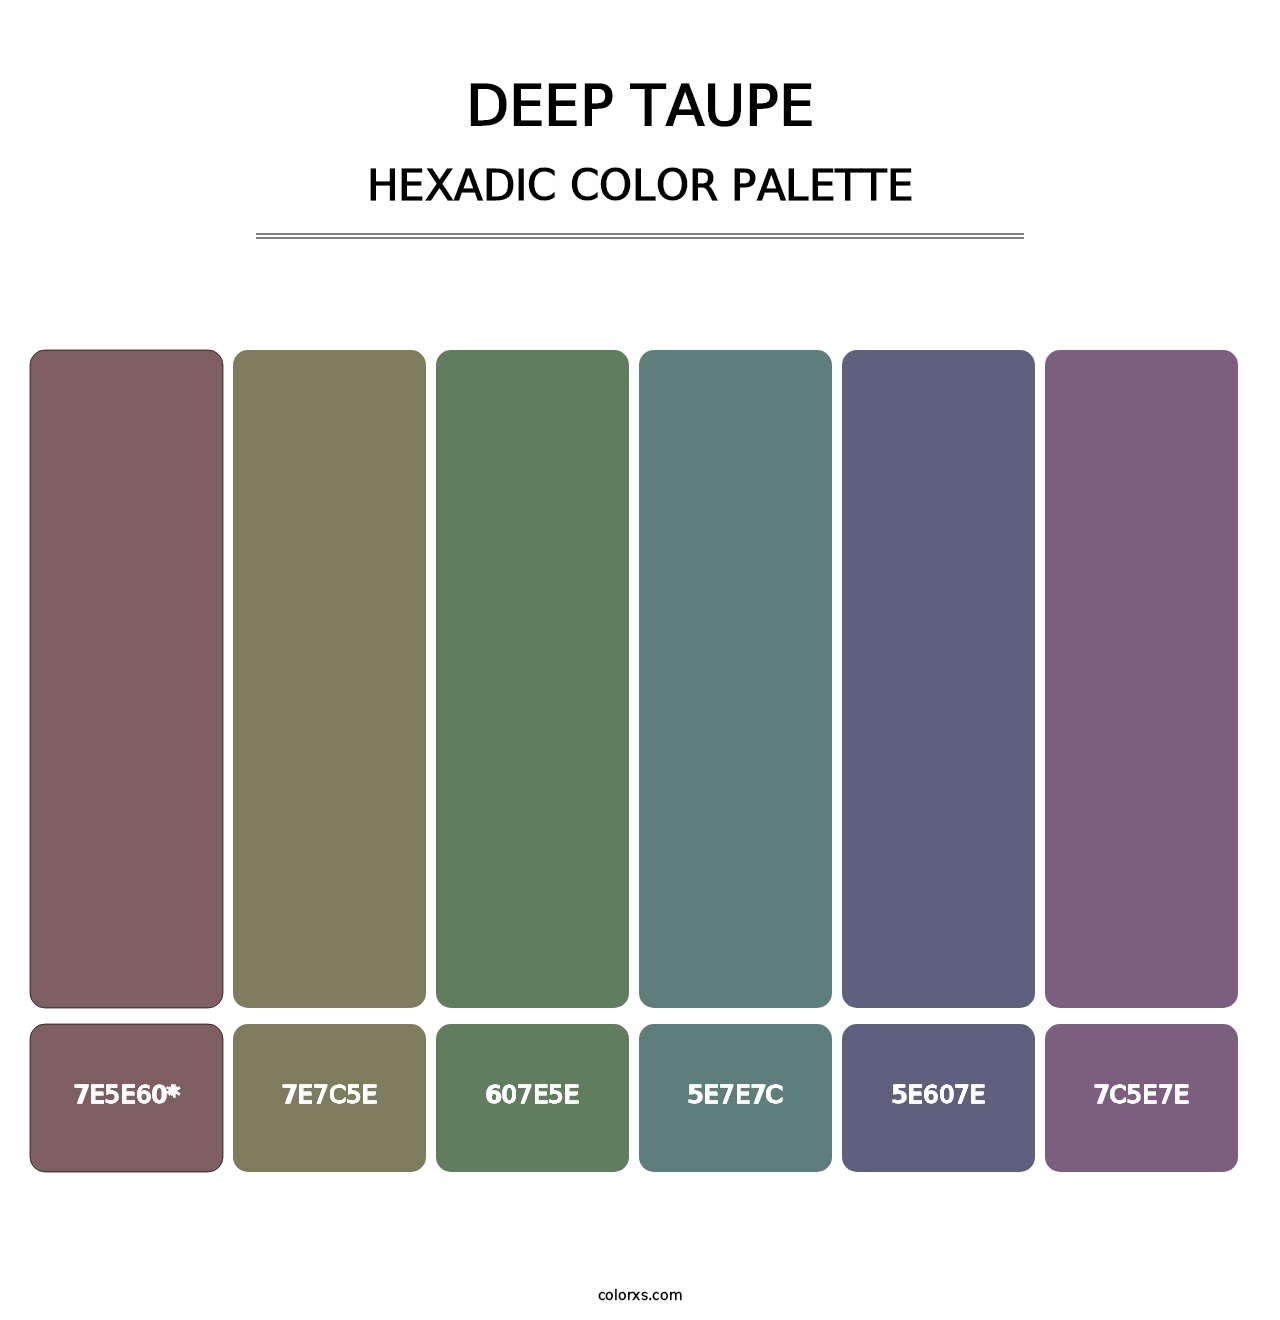 Deep Taupe - Hexadic Color Palette